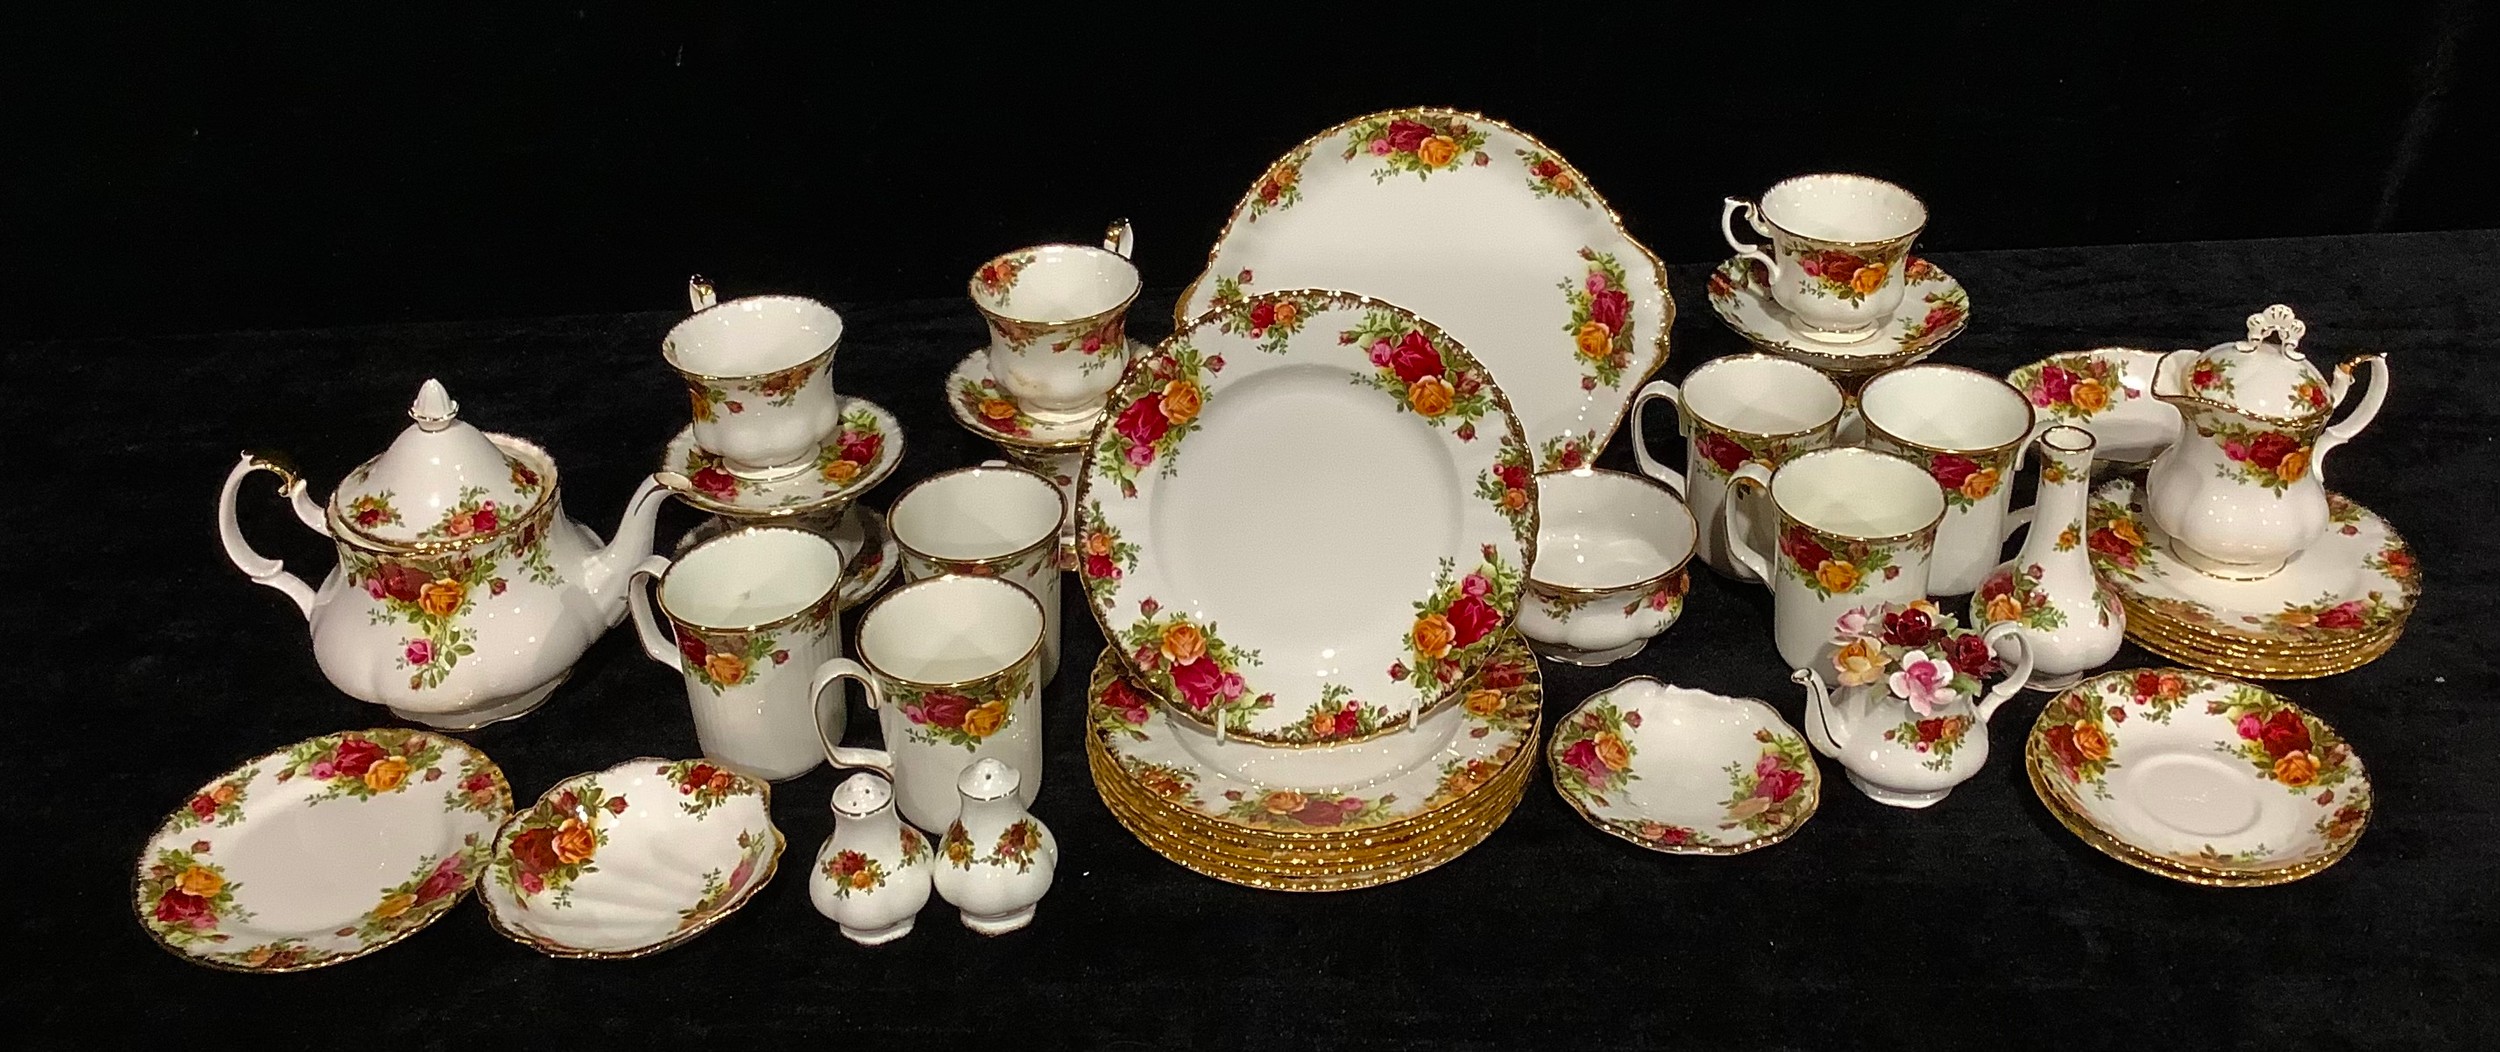 A Royal Albert Old Country Roses pattern teapot, cups and saucers, plates, milk and sugar, salt